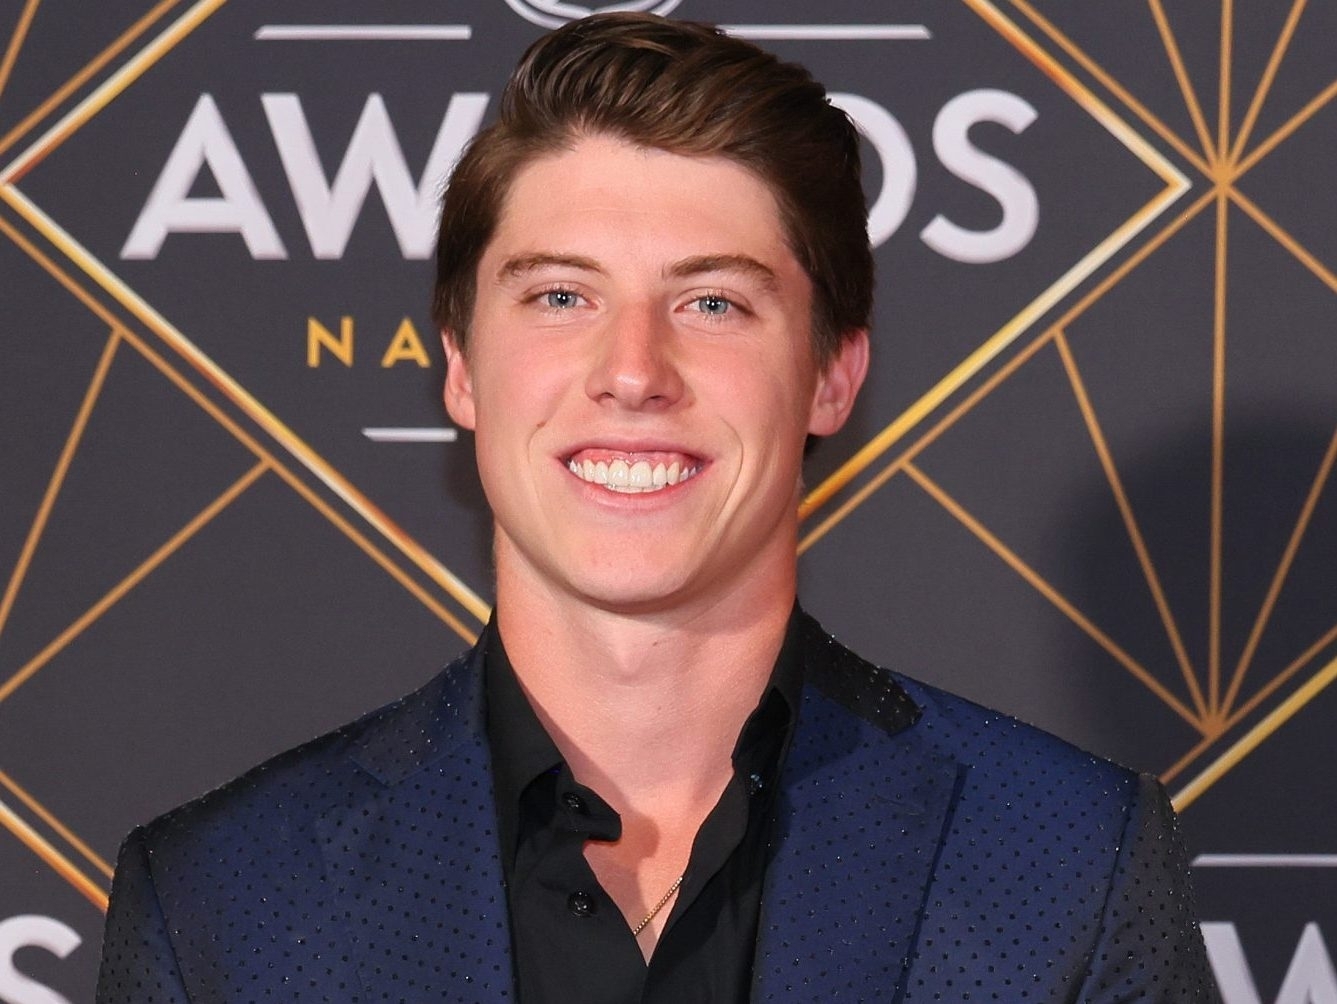 Maple Leafs forward Mitch Marner's vehicle carjacked in Toronto